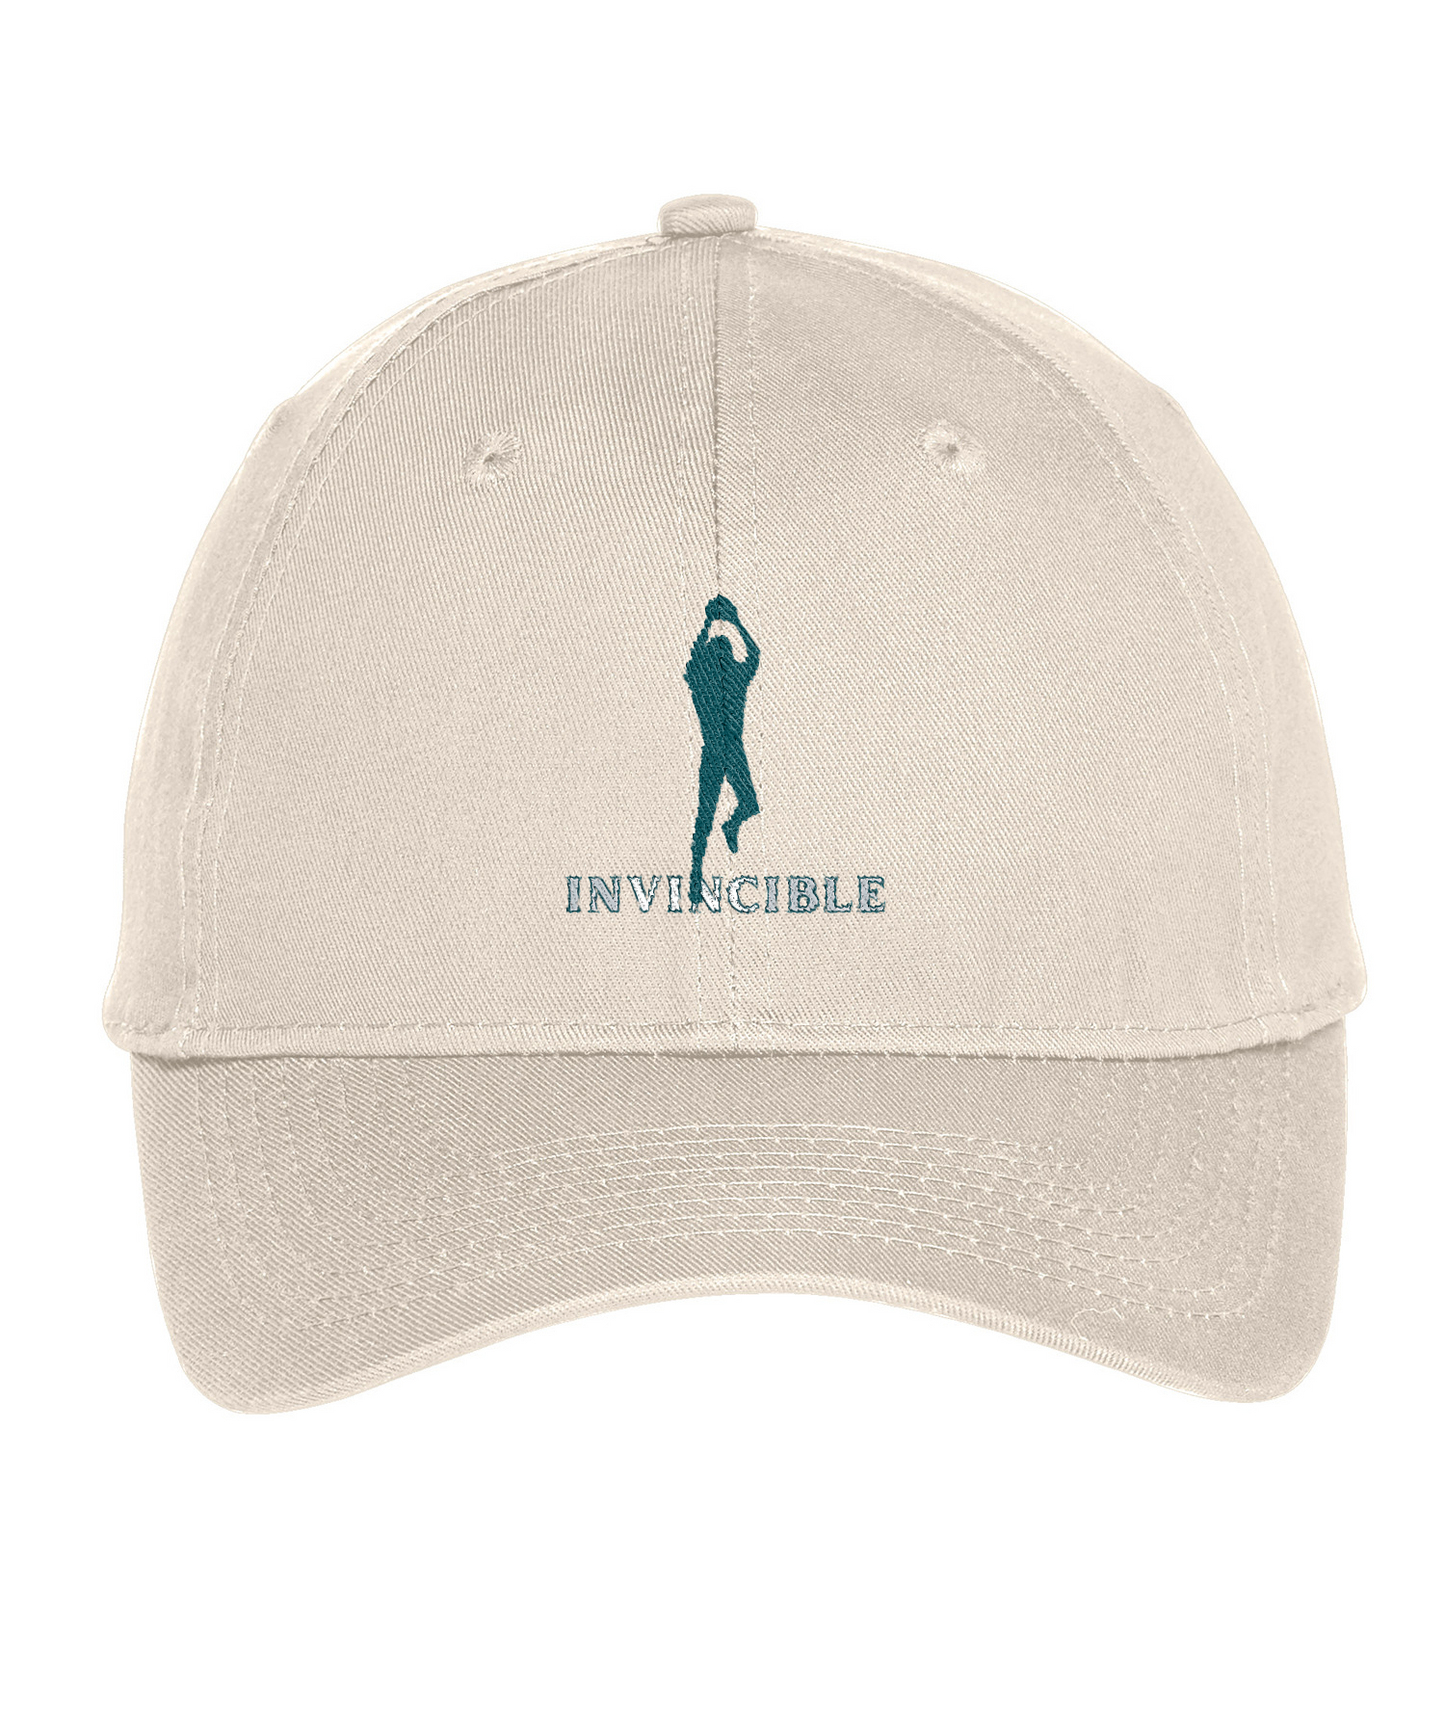 Vince Papale Invincible Logo Embroidered Twill Cap